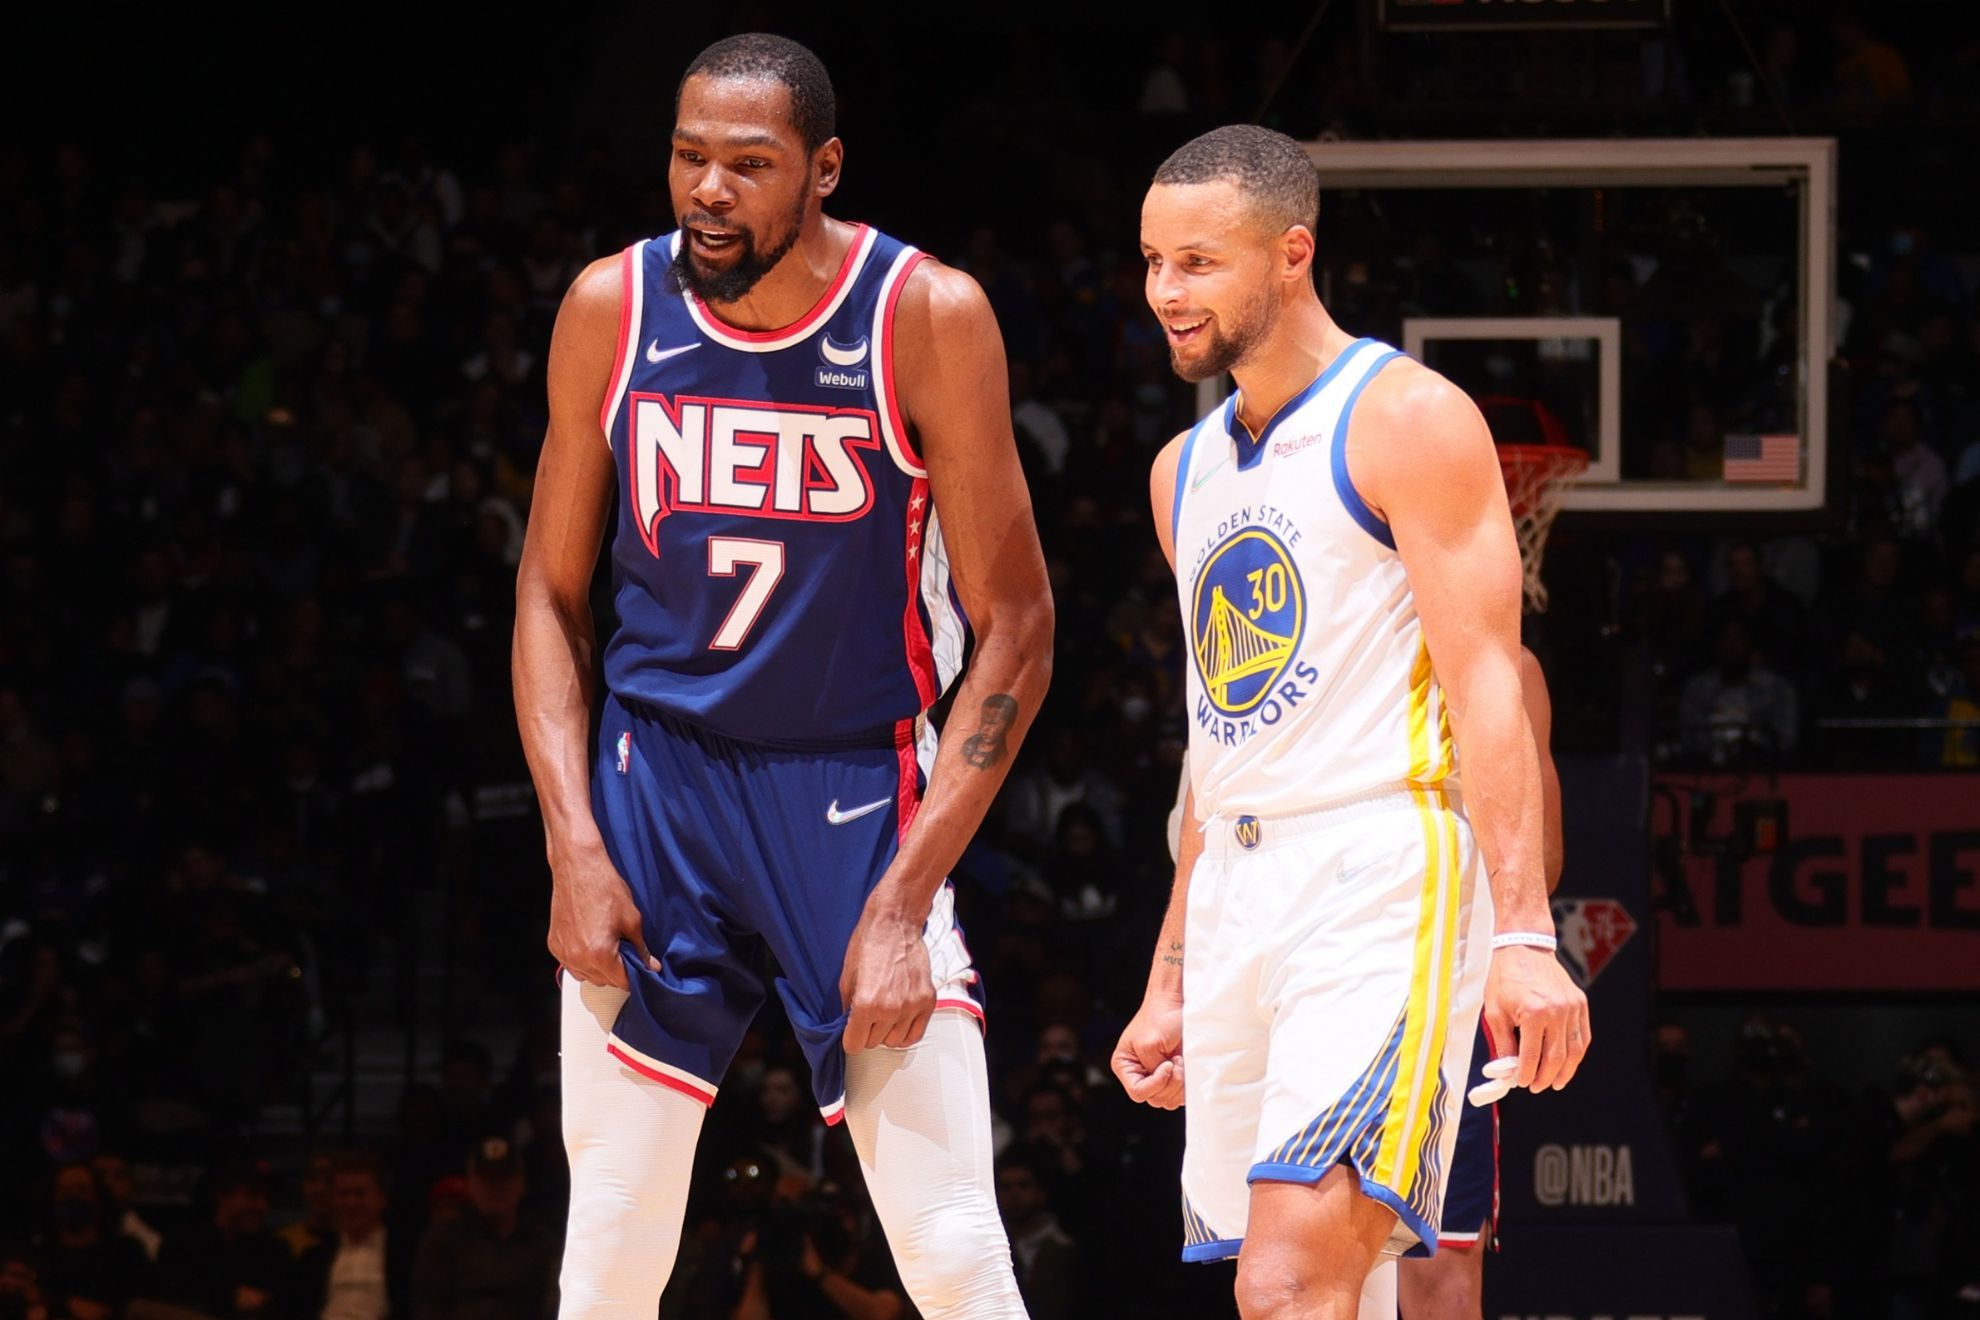 Kevin Durant (Brooklyn Nets) and Steph Curry (Warriors) face off during an NBA game. - AP